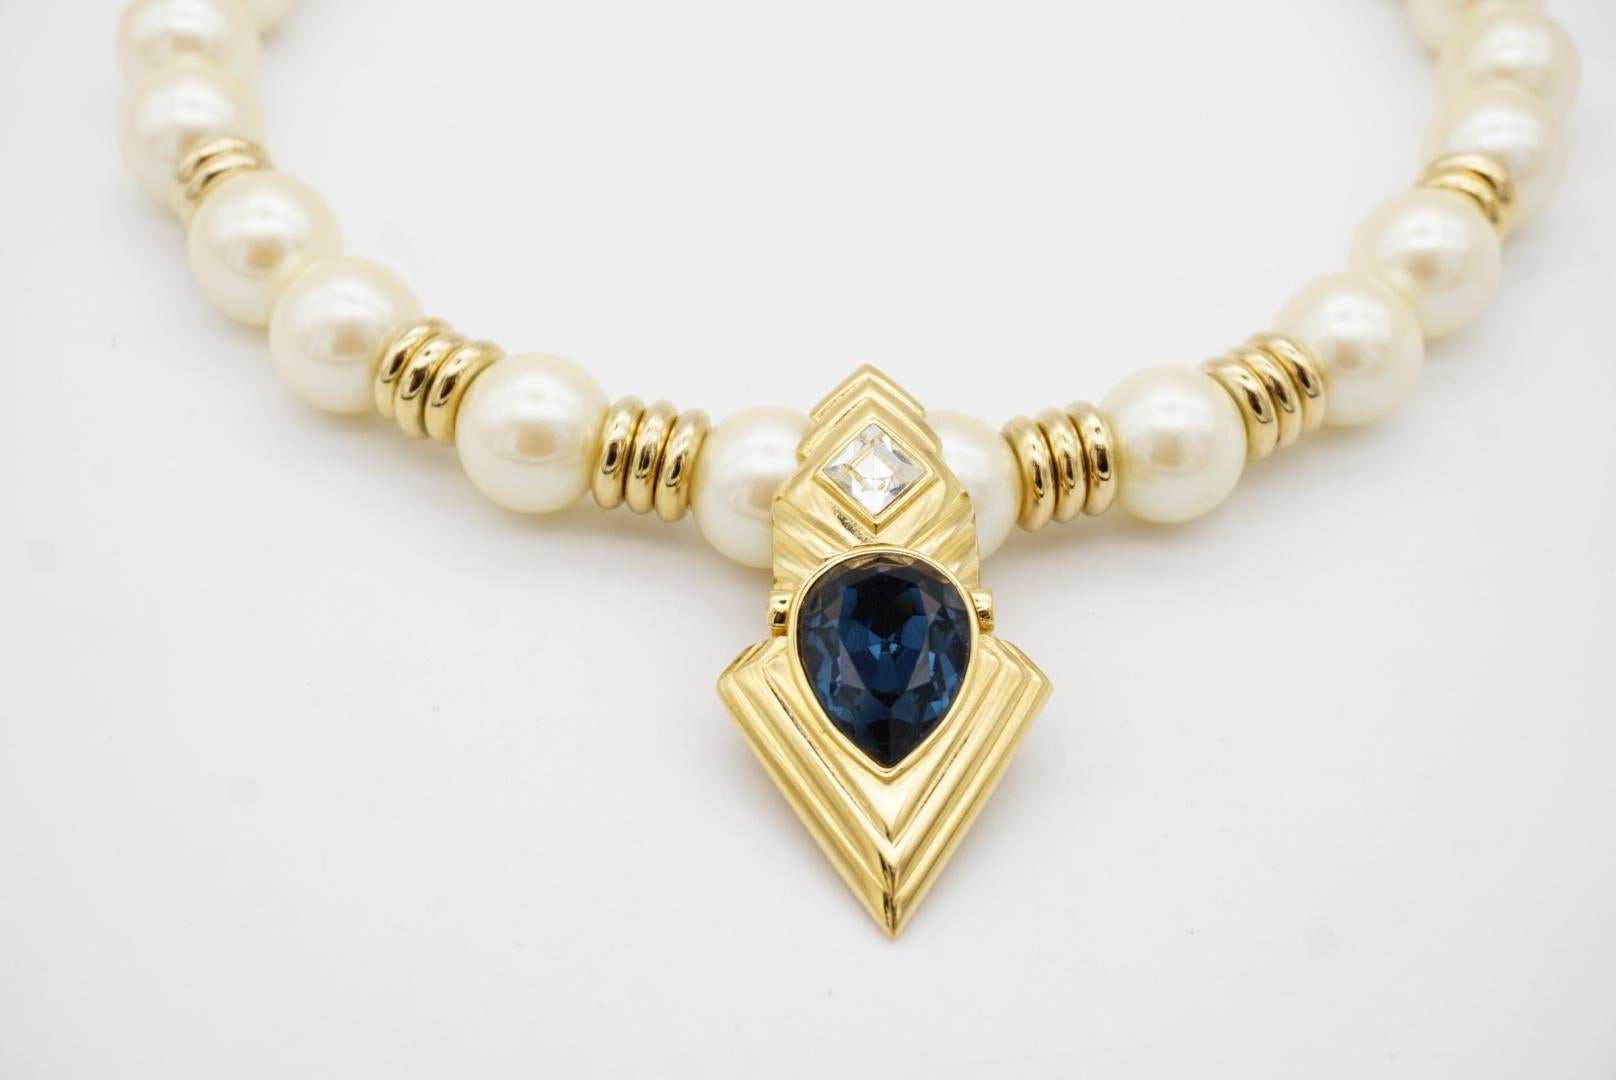 Givenchy Vintage 1990s Large White Pearl Sapphire Crystals Gold Pendant Necklace For Sale 4